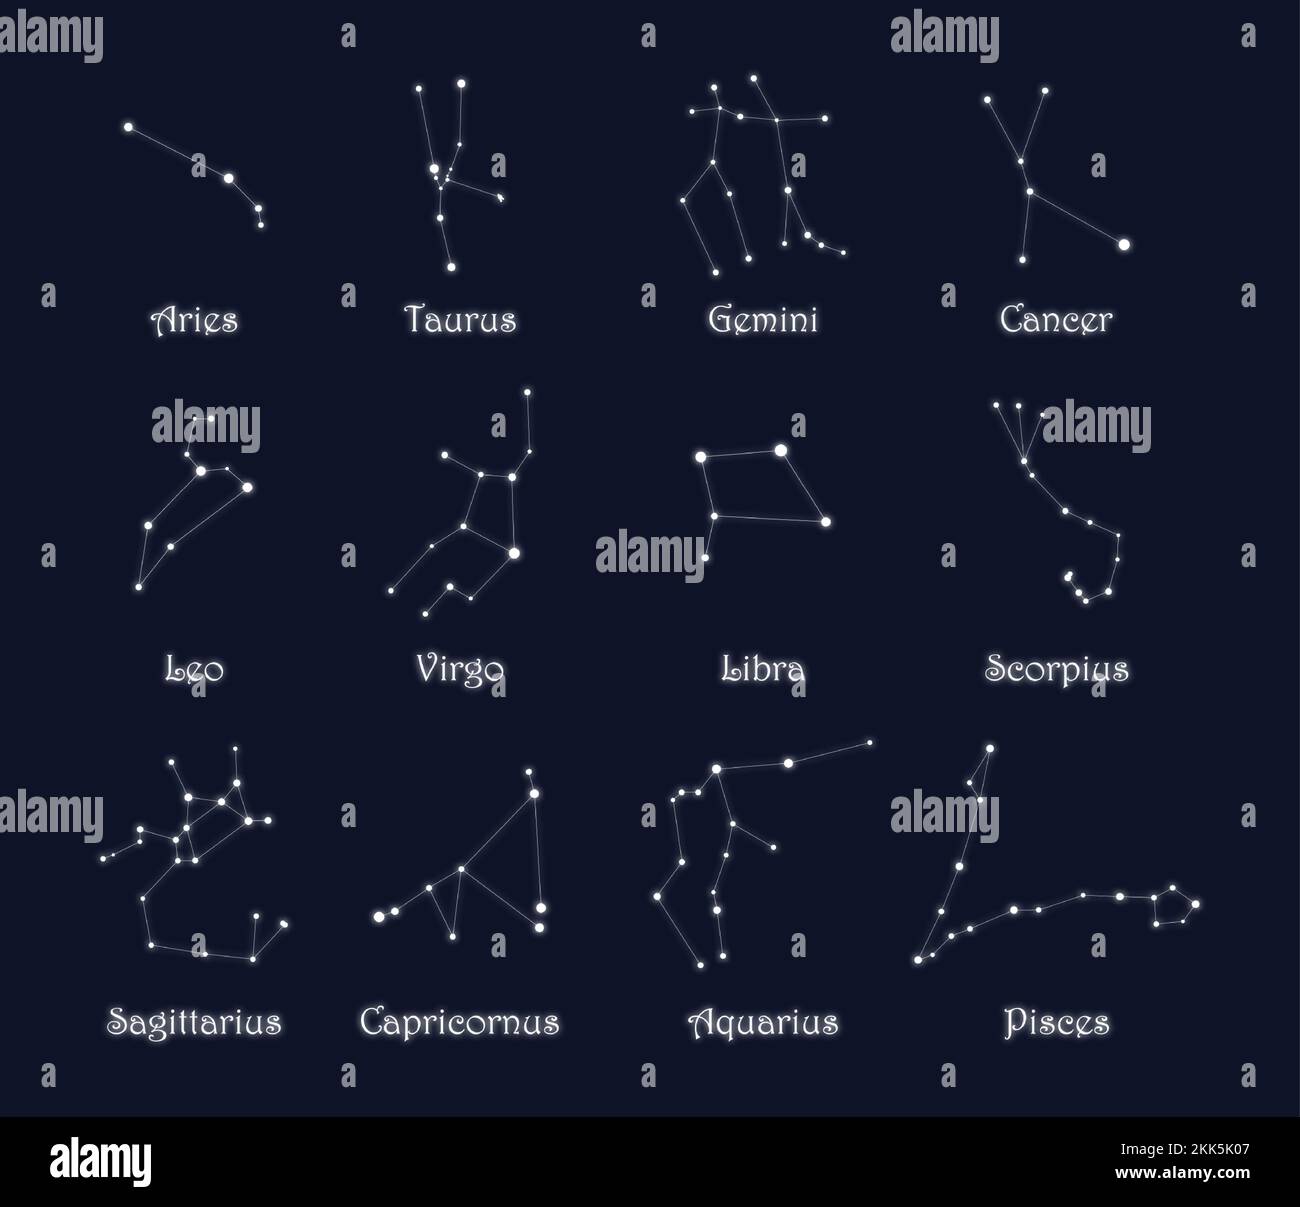 Set of 12 white glowing zodiac constellations with titles isolated on dark background. Stock Vector